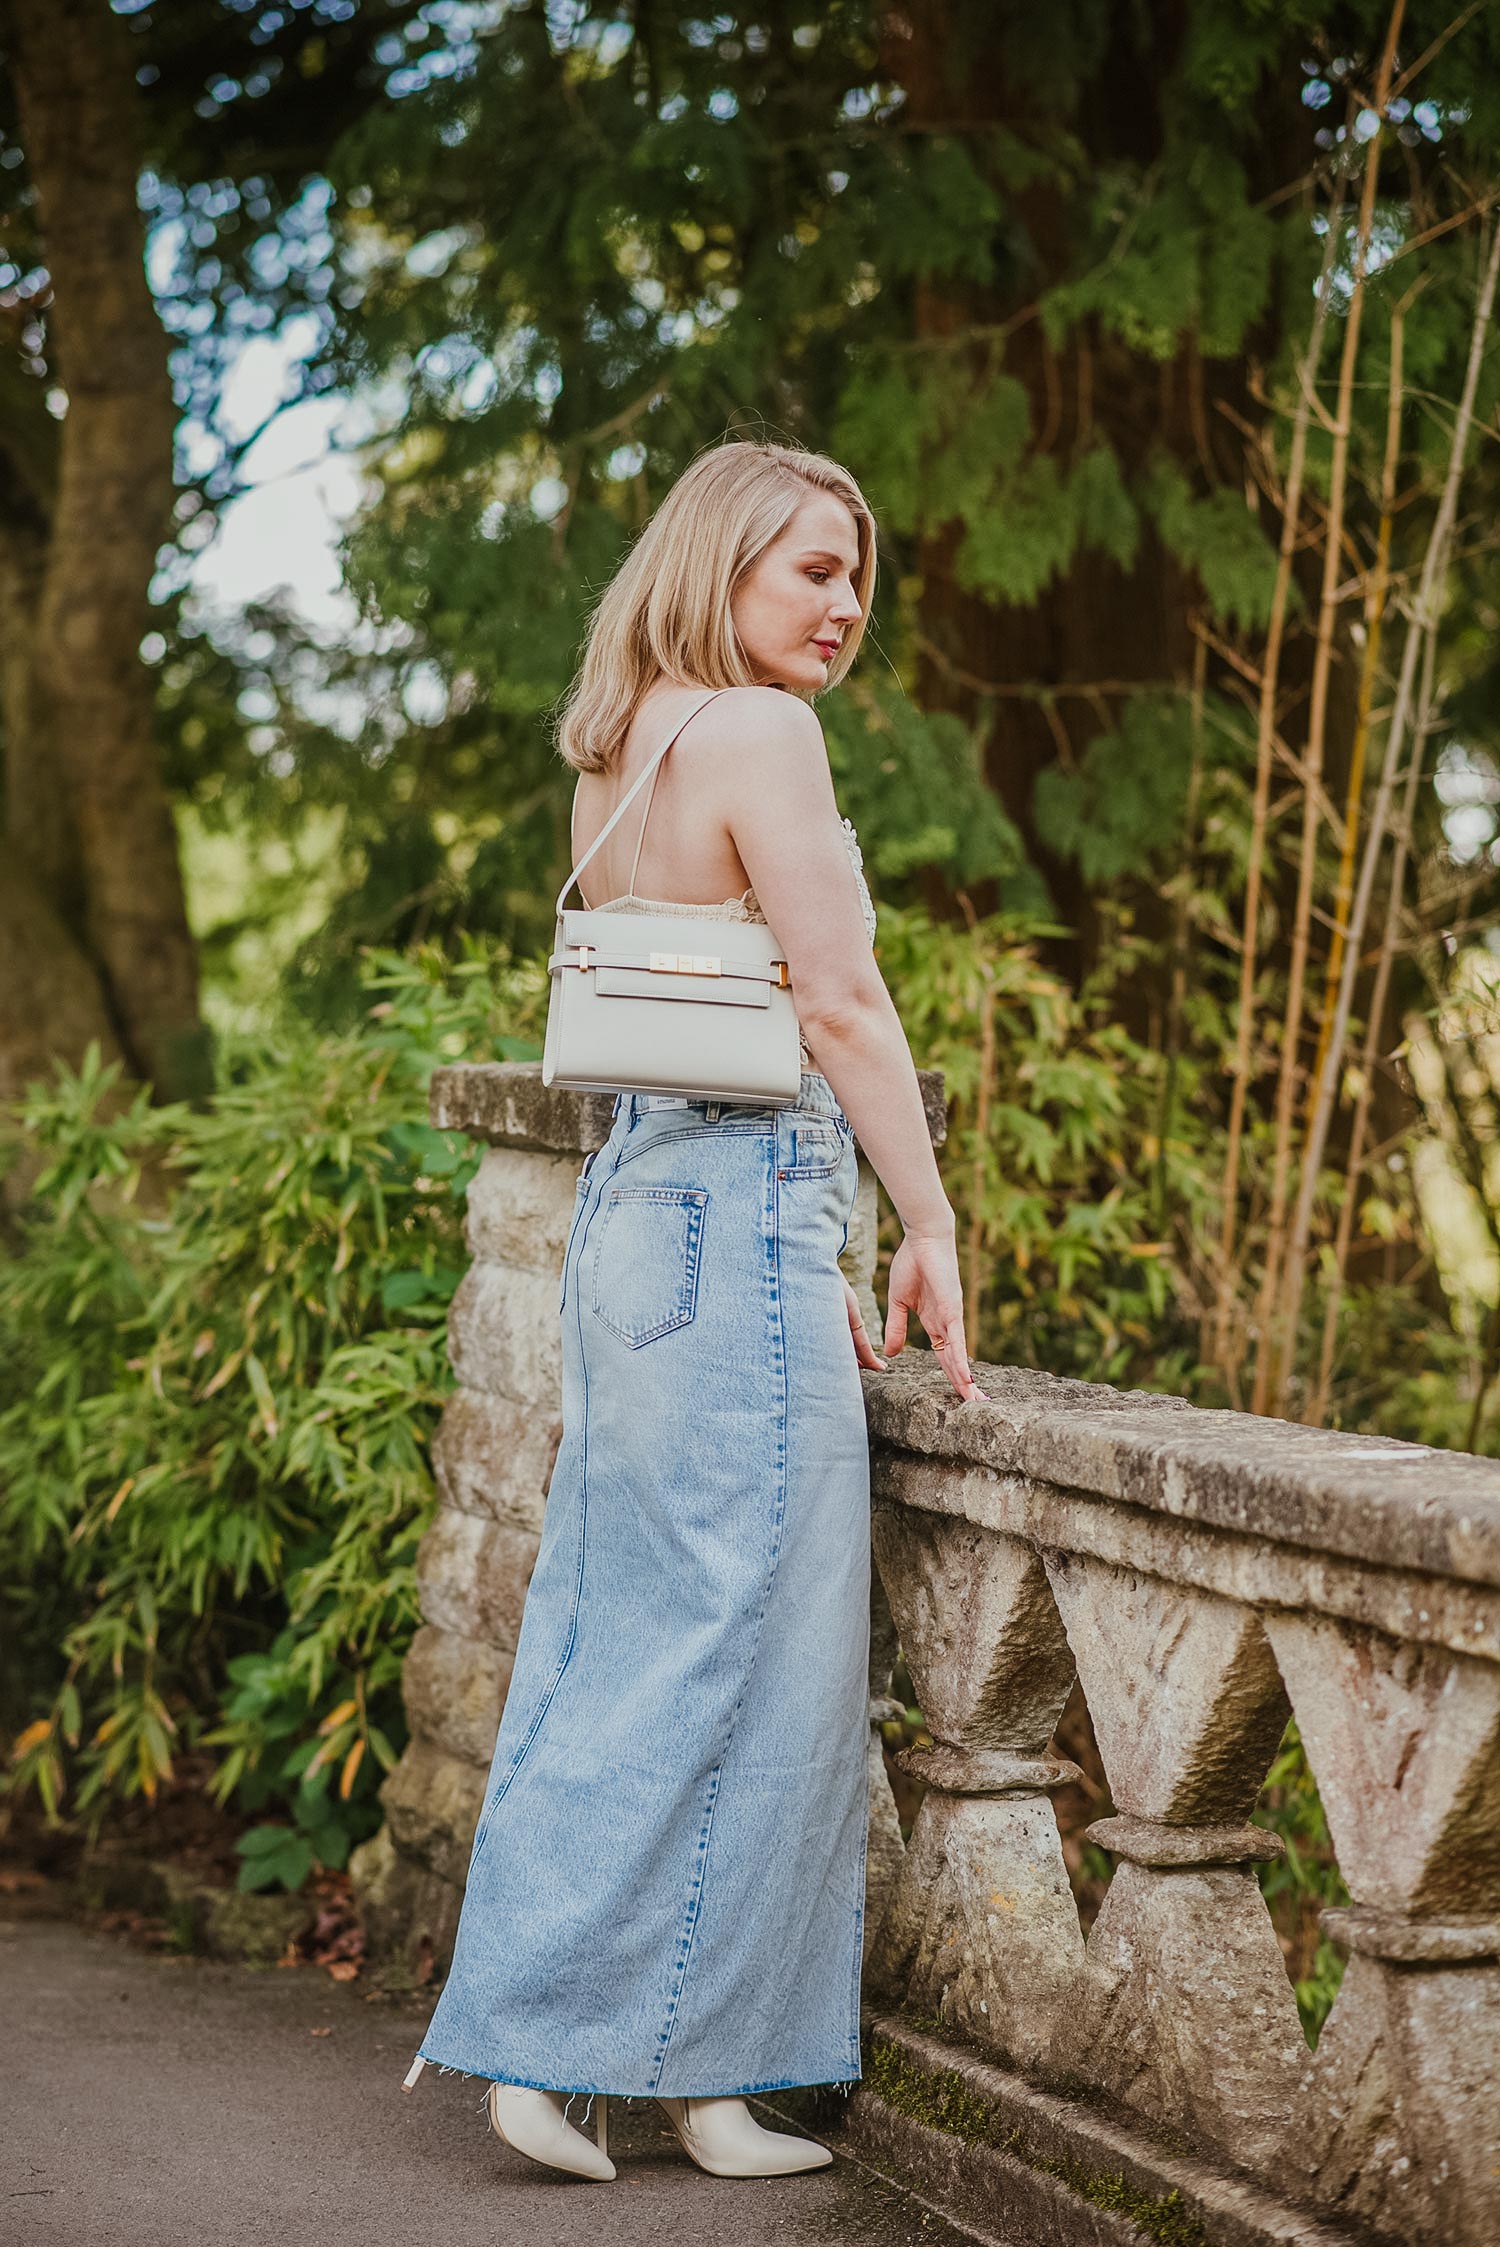 I'm Calling It—This Specific Skirt Is a Serious Trend | Denim skirt outfits,  Denim skirt trend, Denim maxi skirt